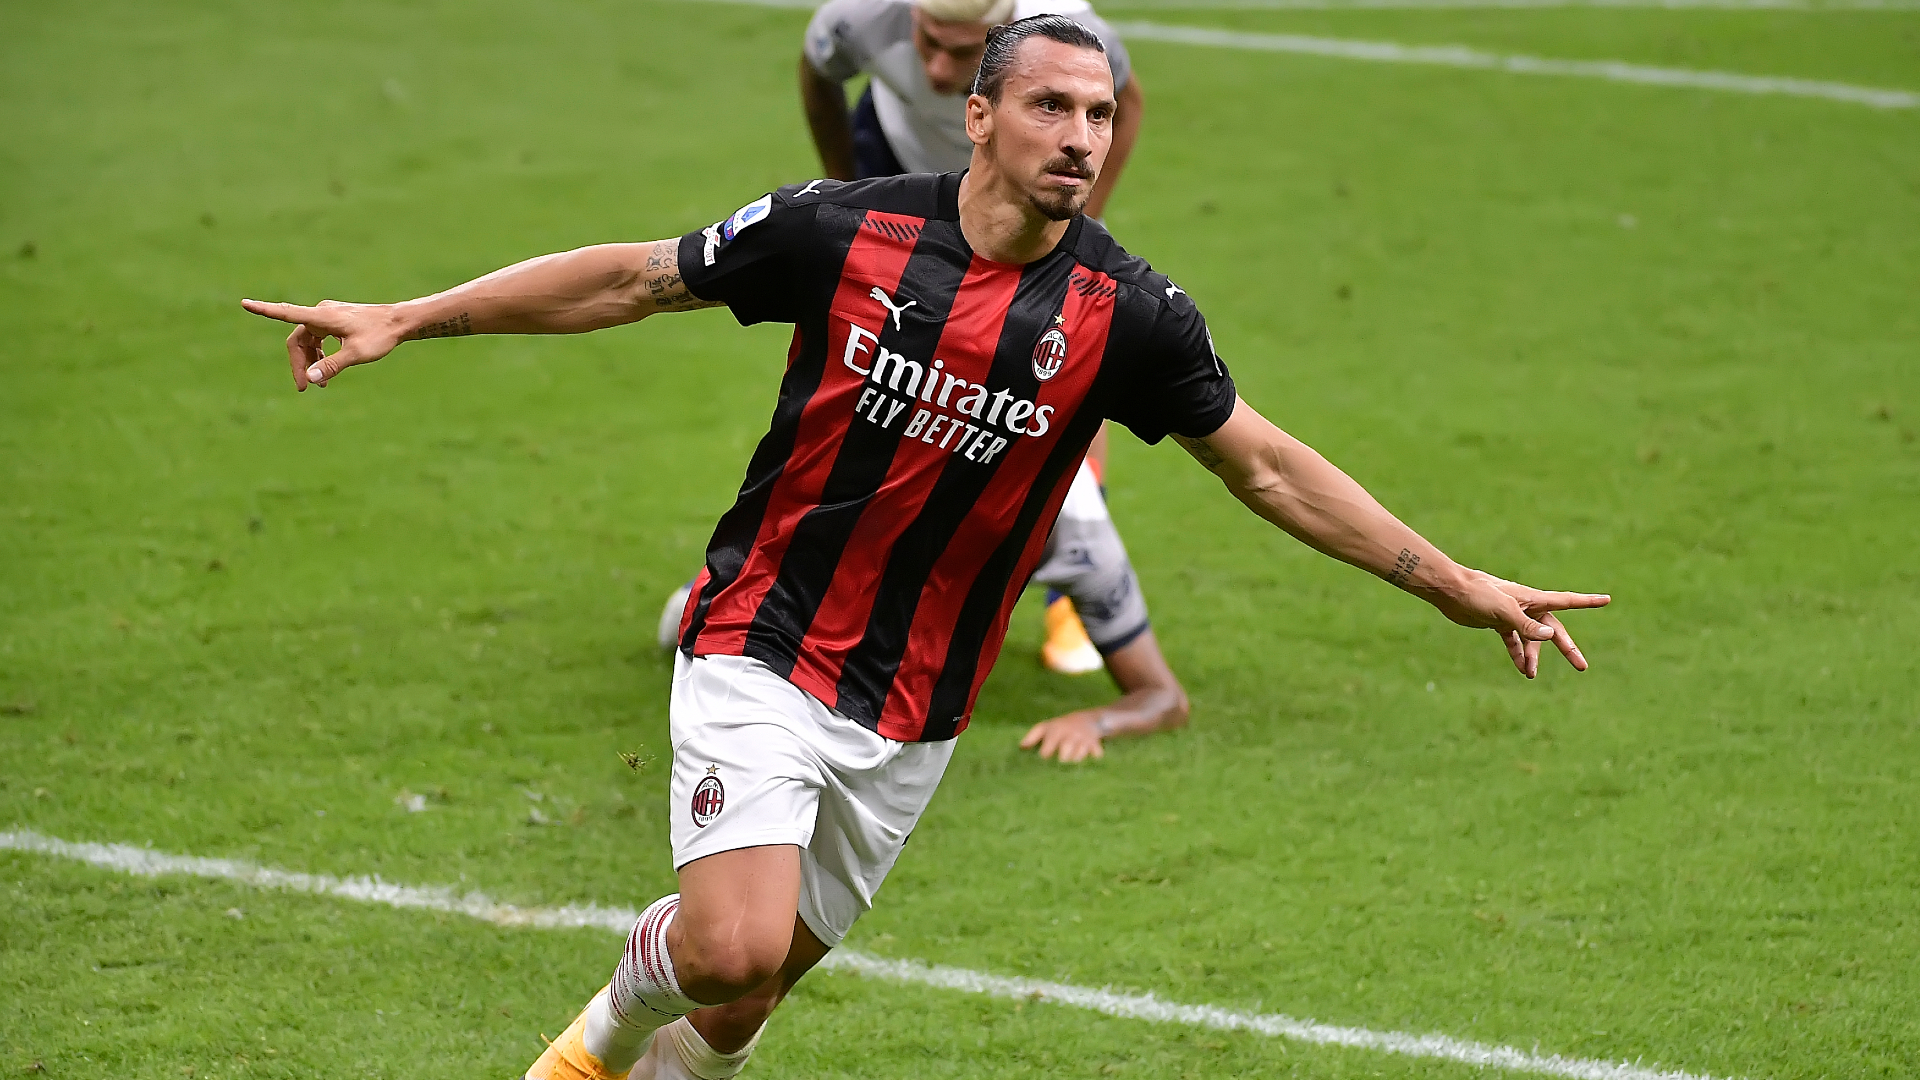 After starring to begin the season, Zlatan Ibrahimovic could renew his deal at Milan.